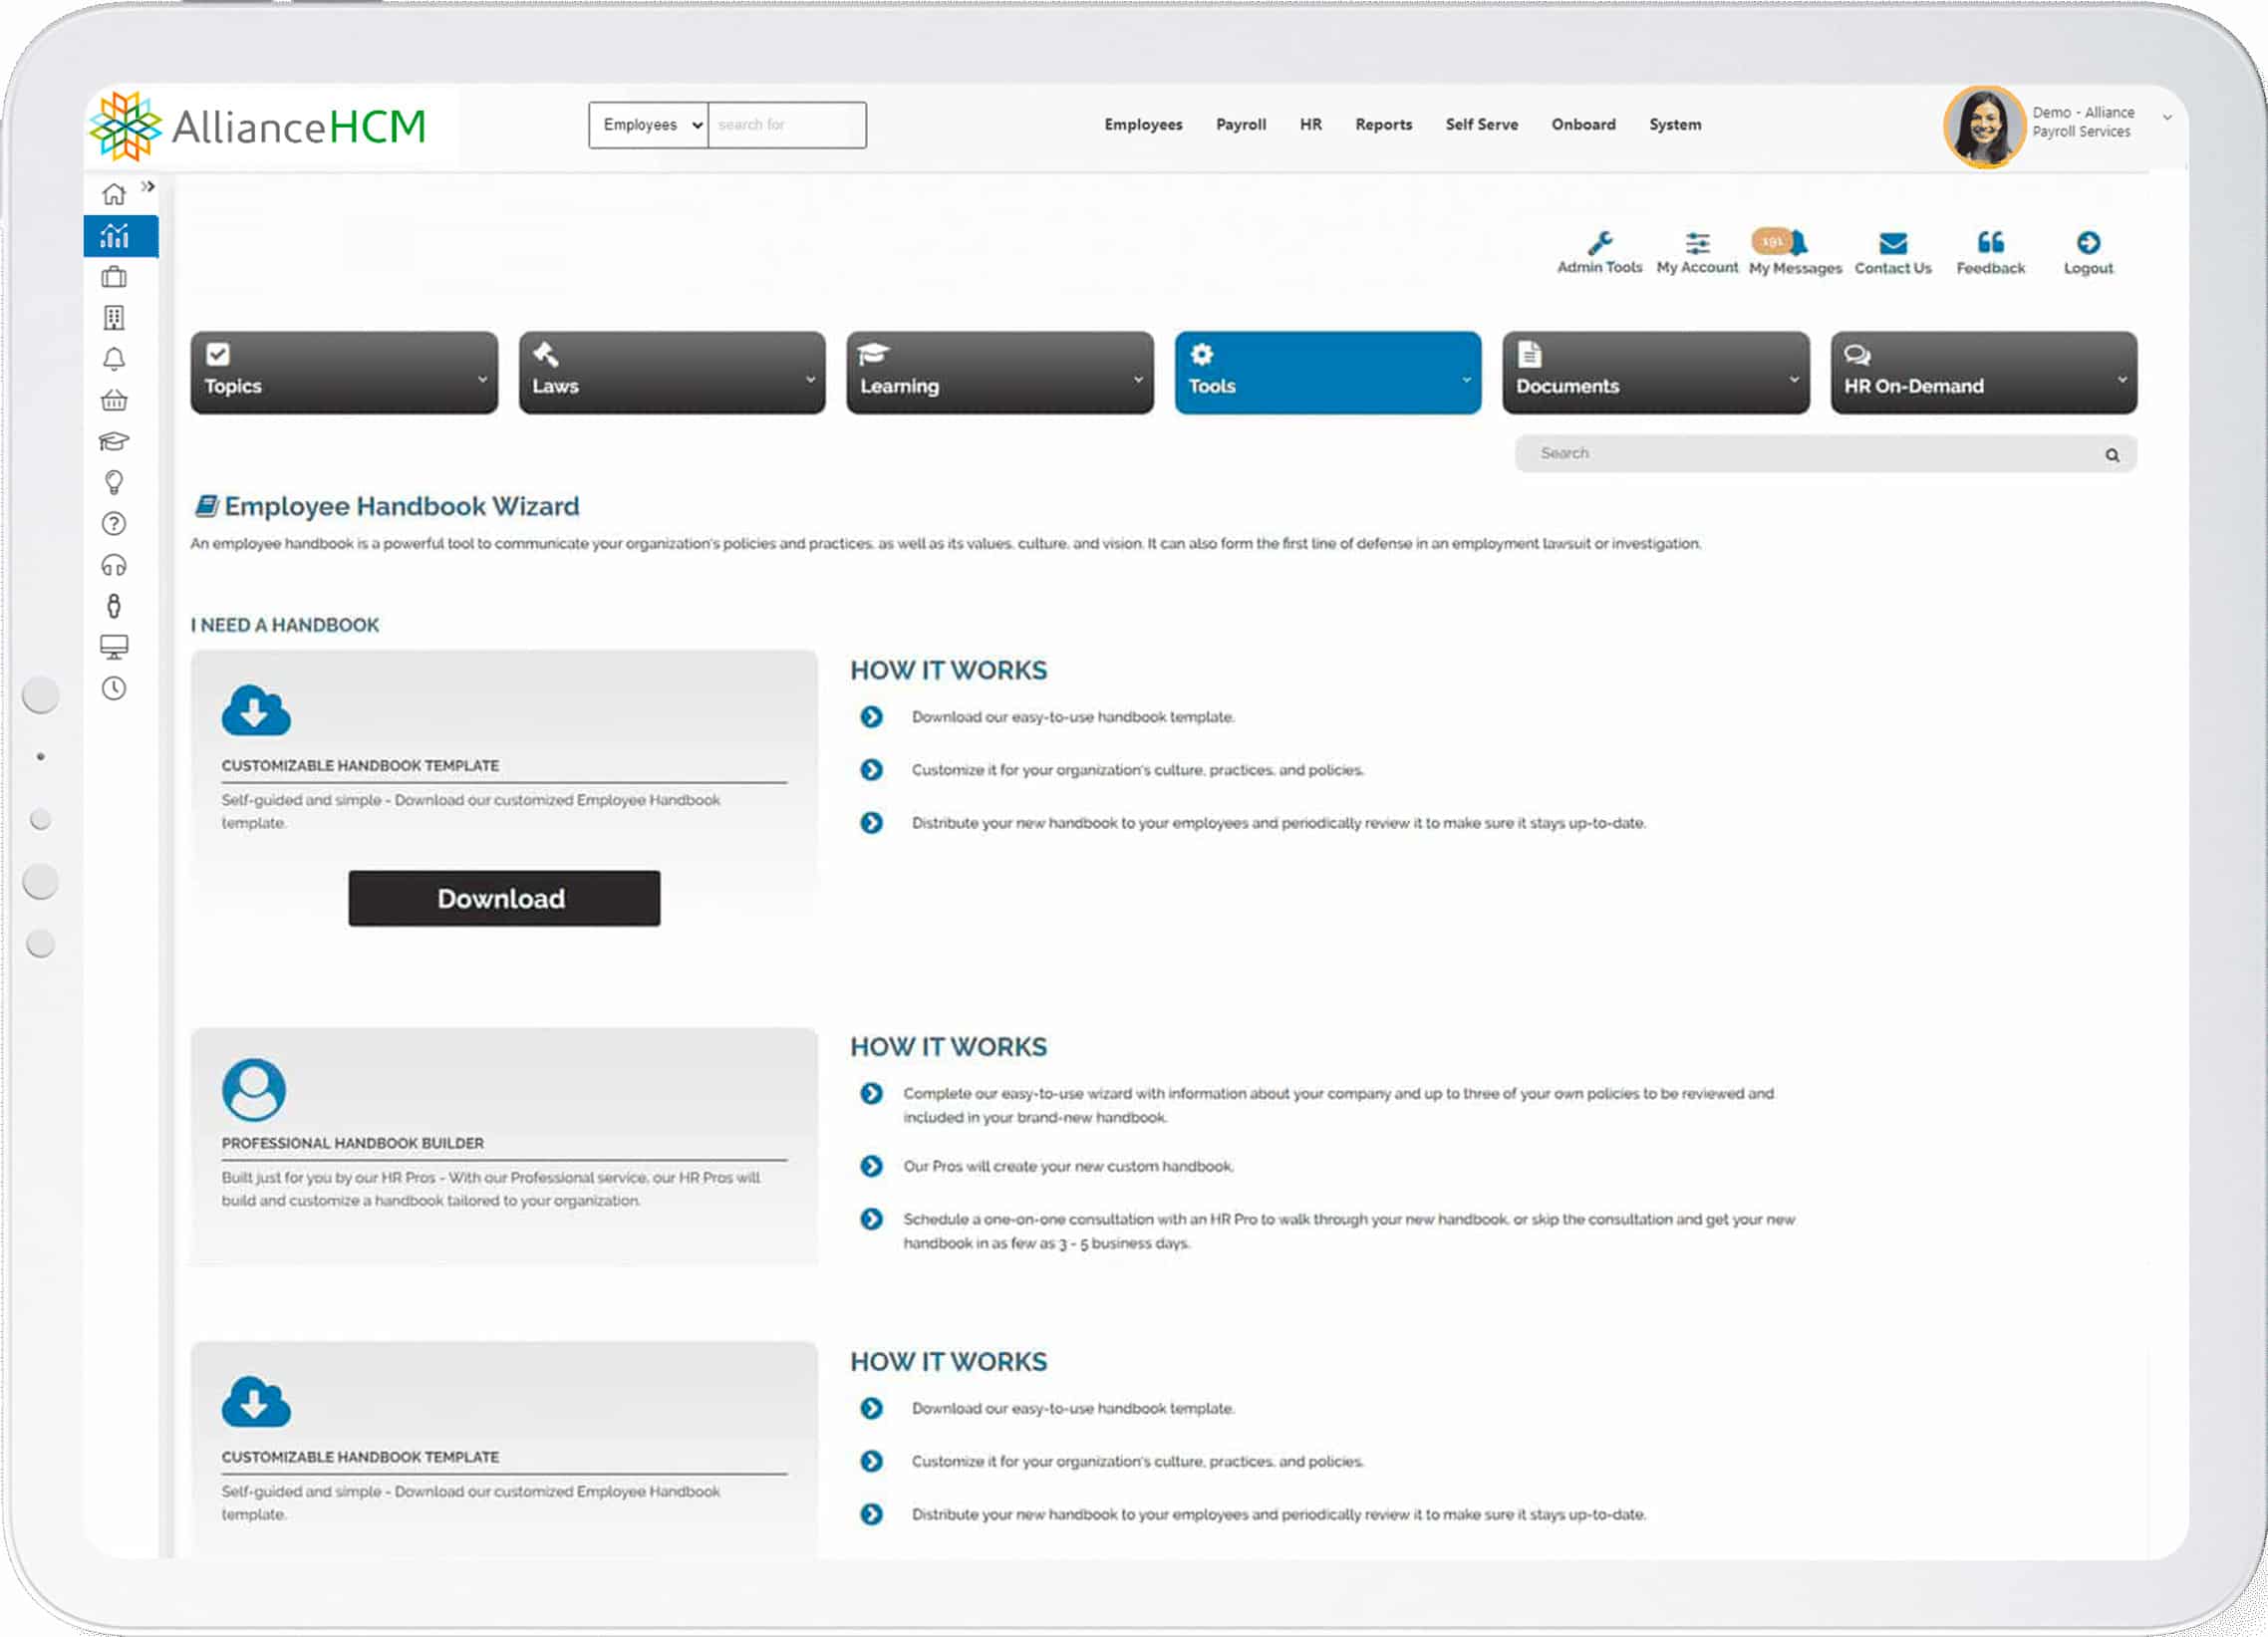 AllianceHCM HR and learning management dashboard